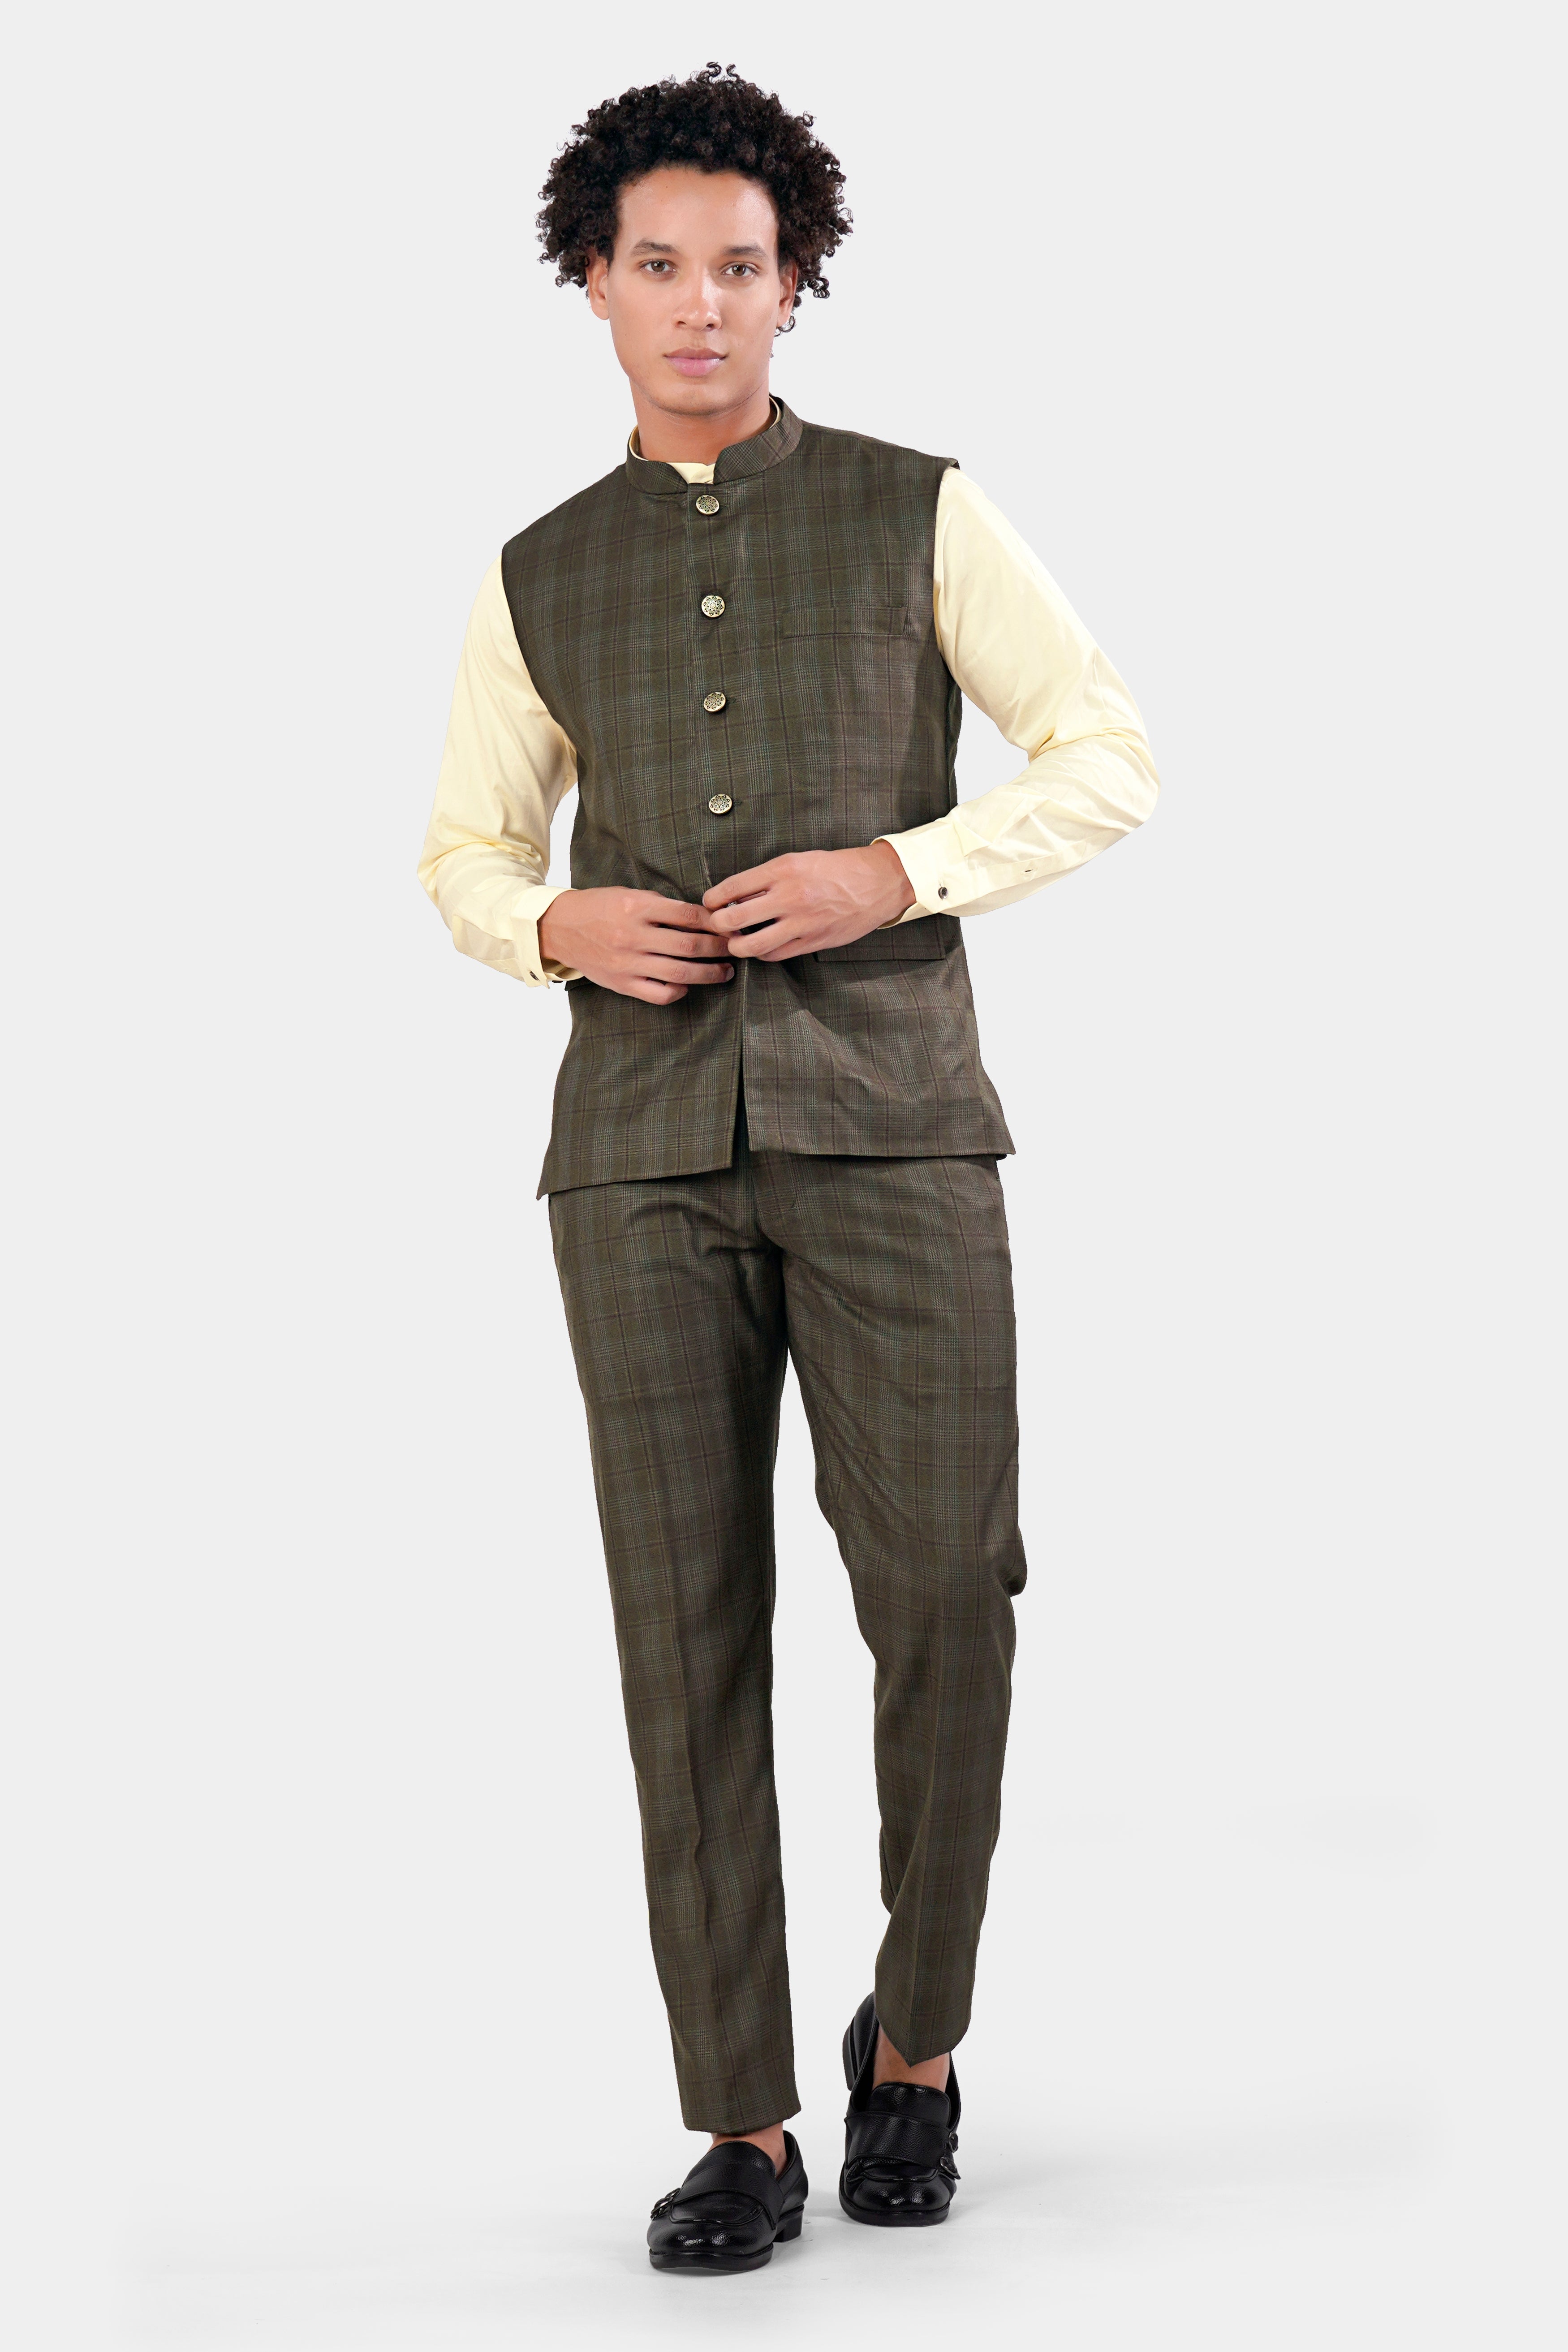 Fuscous Gray and Bistre Brown Plaid Wool Rich Nehru Jacket WC2951-36, WC2951-38, WC2951-40, WC2951-42, WC2951-44, WC2951-46, WC2951-48, WC2951-50, WC2951-52, WC2951-54, WC2951-56, WC2951-58, WC2951-60